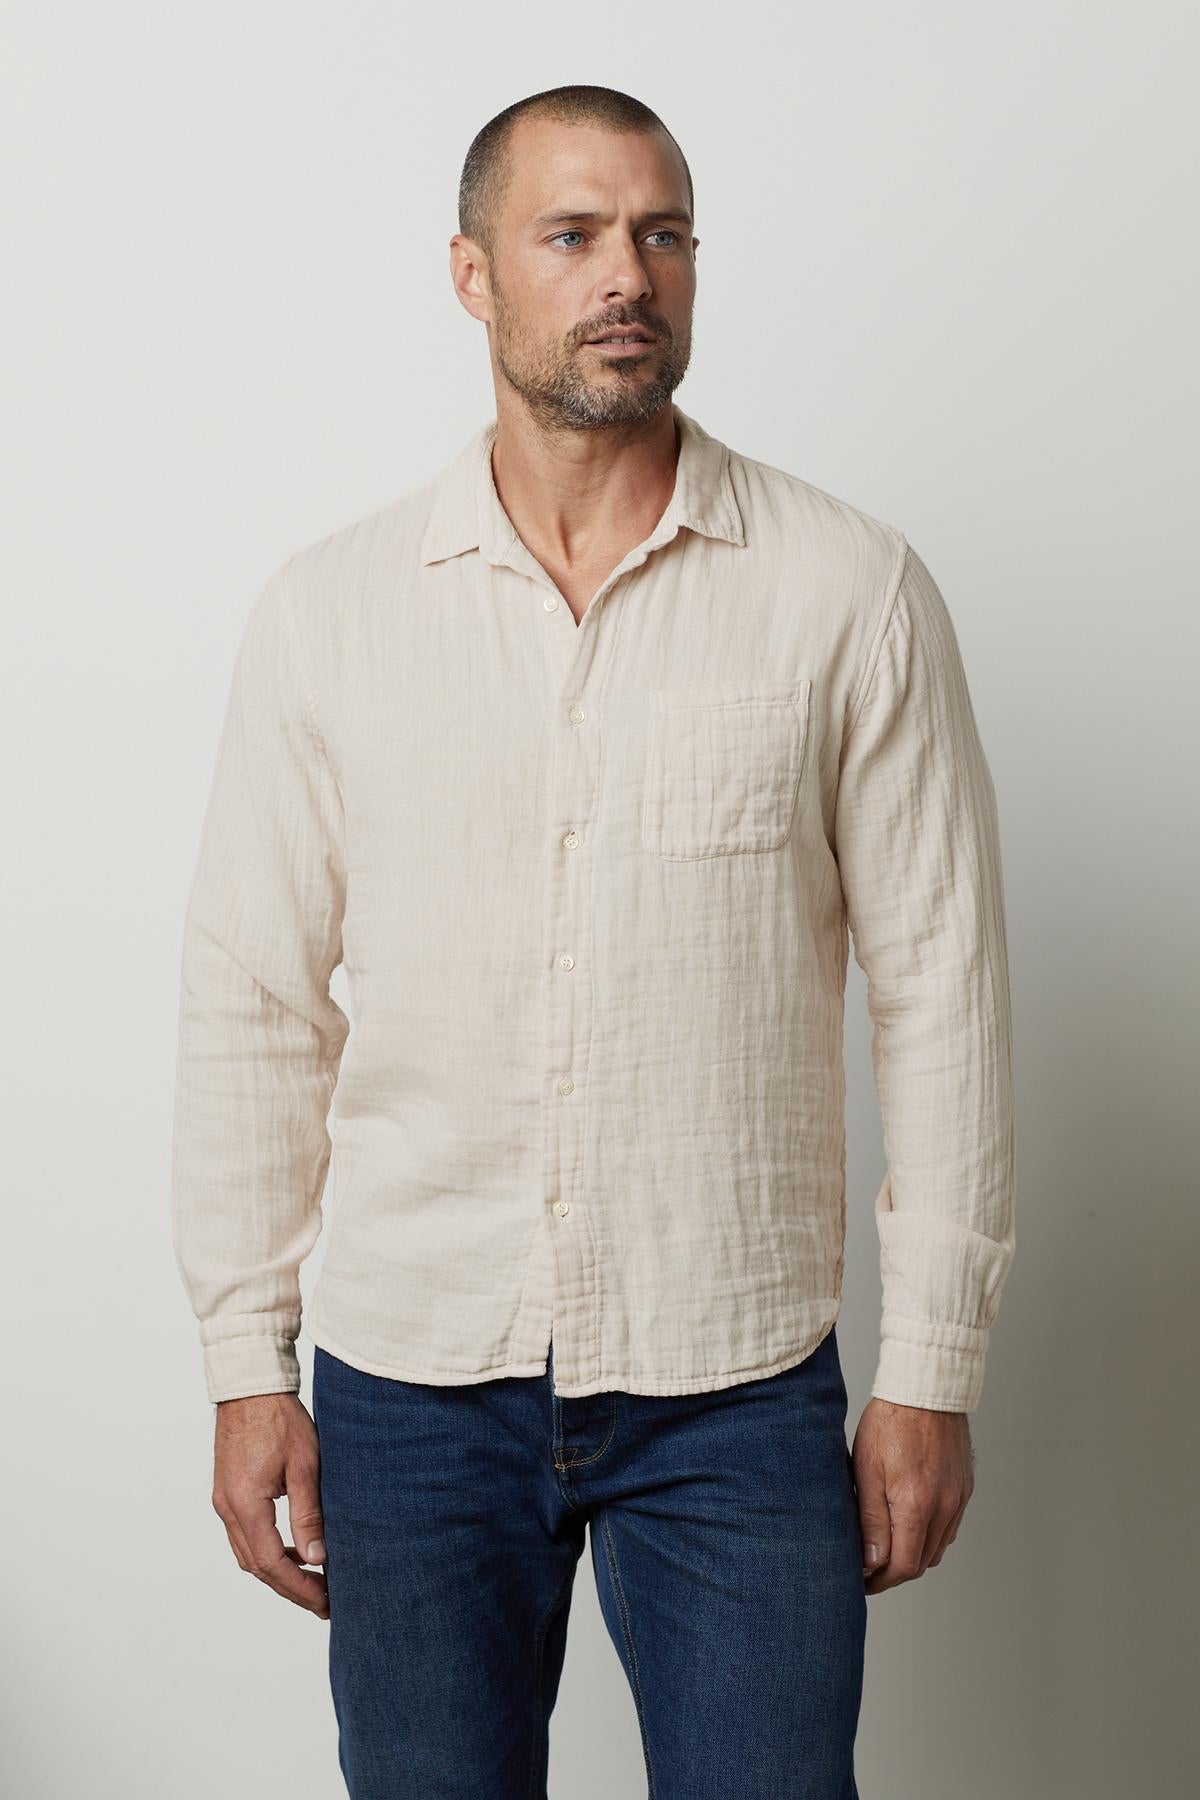 A man with a short beard wearing a Velvet by Graham & Spencer ELTON COTTON GAUZE BUTTON-UP SHIRT and jeans, standing against a plain white background, looks to the side thoughtfully.-36805210538177